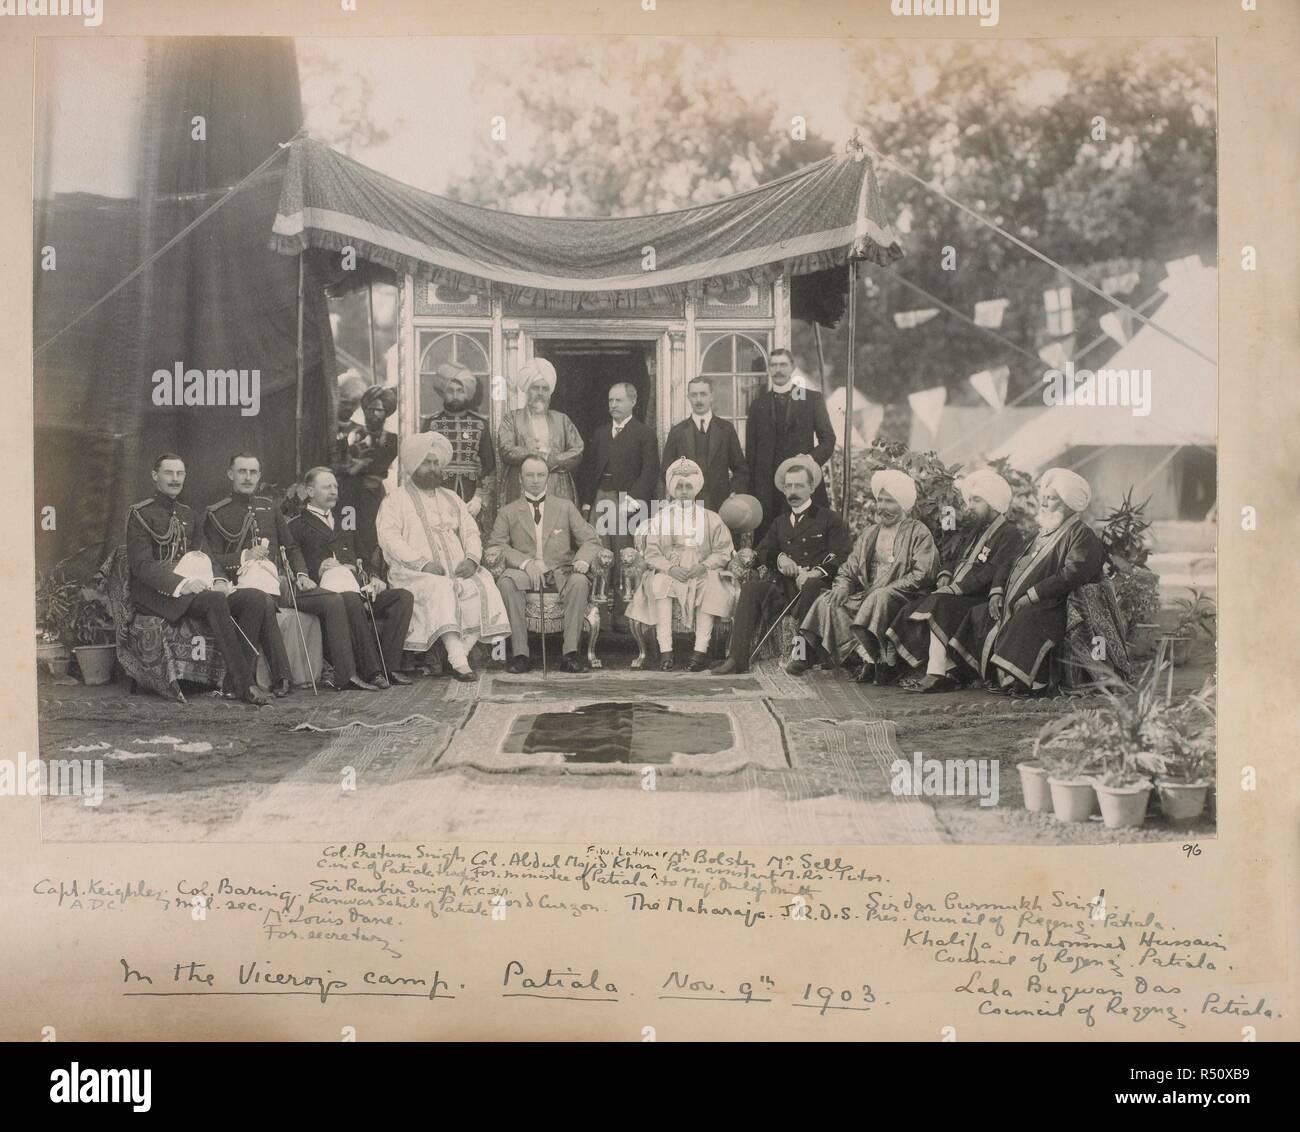 Photograph of a group including Lord Curzon and the Maharaja of Patiala. In the Viceroy's camp, Patiala, Nov 9th 1903. Sitters named; from left: 'Capt Keighley, ADC; Col Baring, mil sec; Mr Louis Dane, For secretary; Sir Ranbir Singh, KCSI, Kanwar Sahib of Patiala; Col Pretum Singh, C in C of Patiala troops; Col Abdul Majid Khan, For minister of Patiala; Lord Curzon; F.W. Latimer; The Maharaja; Mr Bolster, Pers assistant to Maj Dunlop Smith; Mr Sells, MR's Tutor; J.R.D.S. [Dunlop Smith]; Sirdar Gurmukh Singh, Pres, Council of Regency, Patiala; Khalifa Mahomed Hussain, Council of Regency, Patia Stock Photo